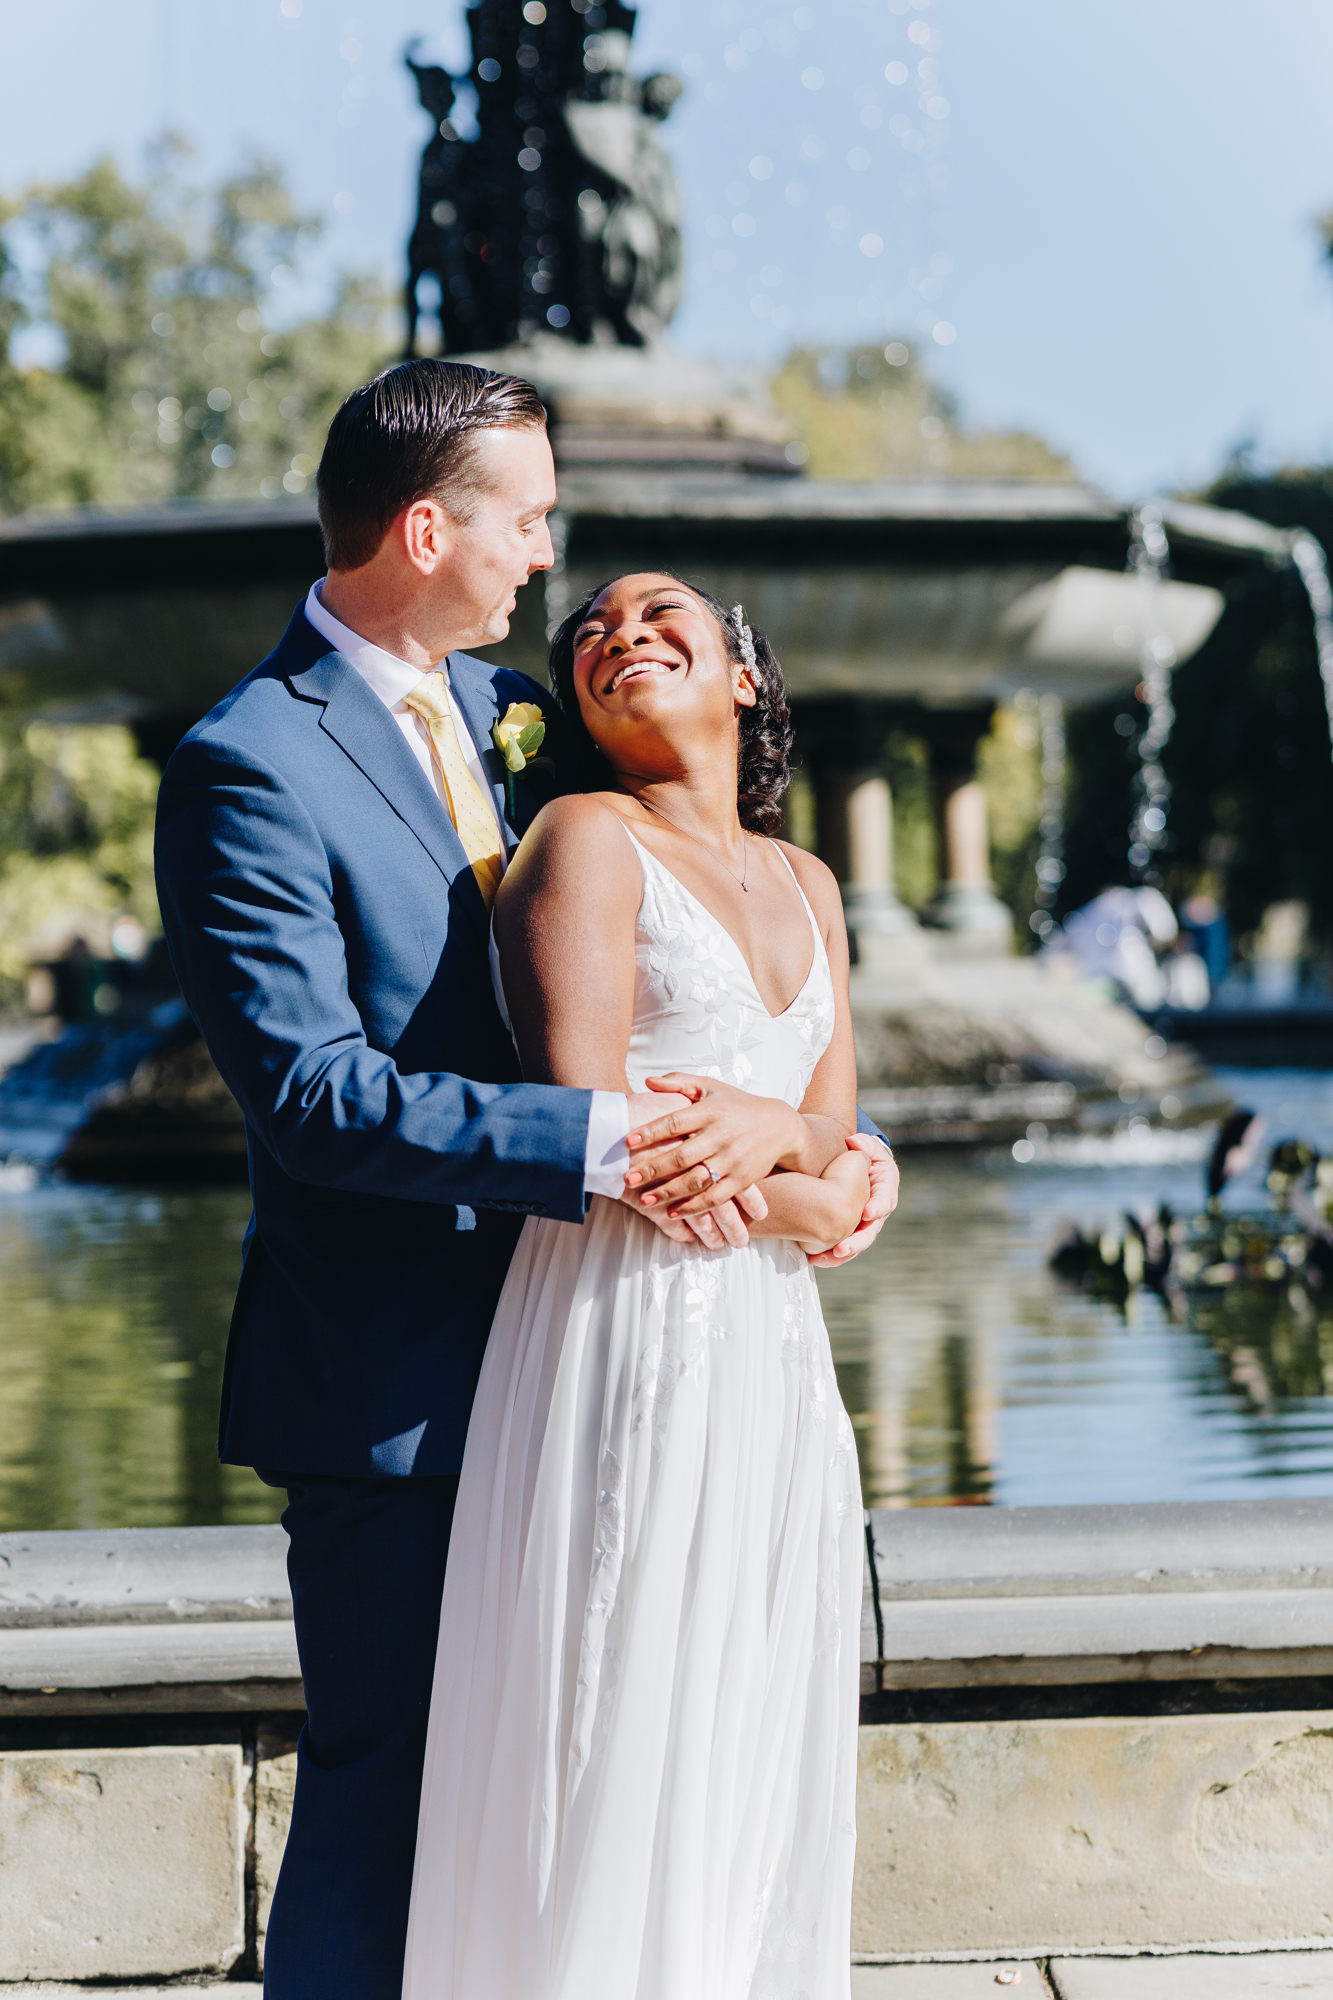 Intimate Central Park Elopement Photos in New York